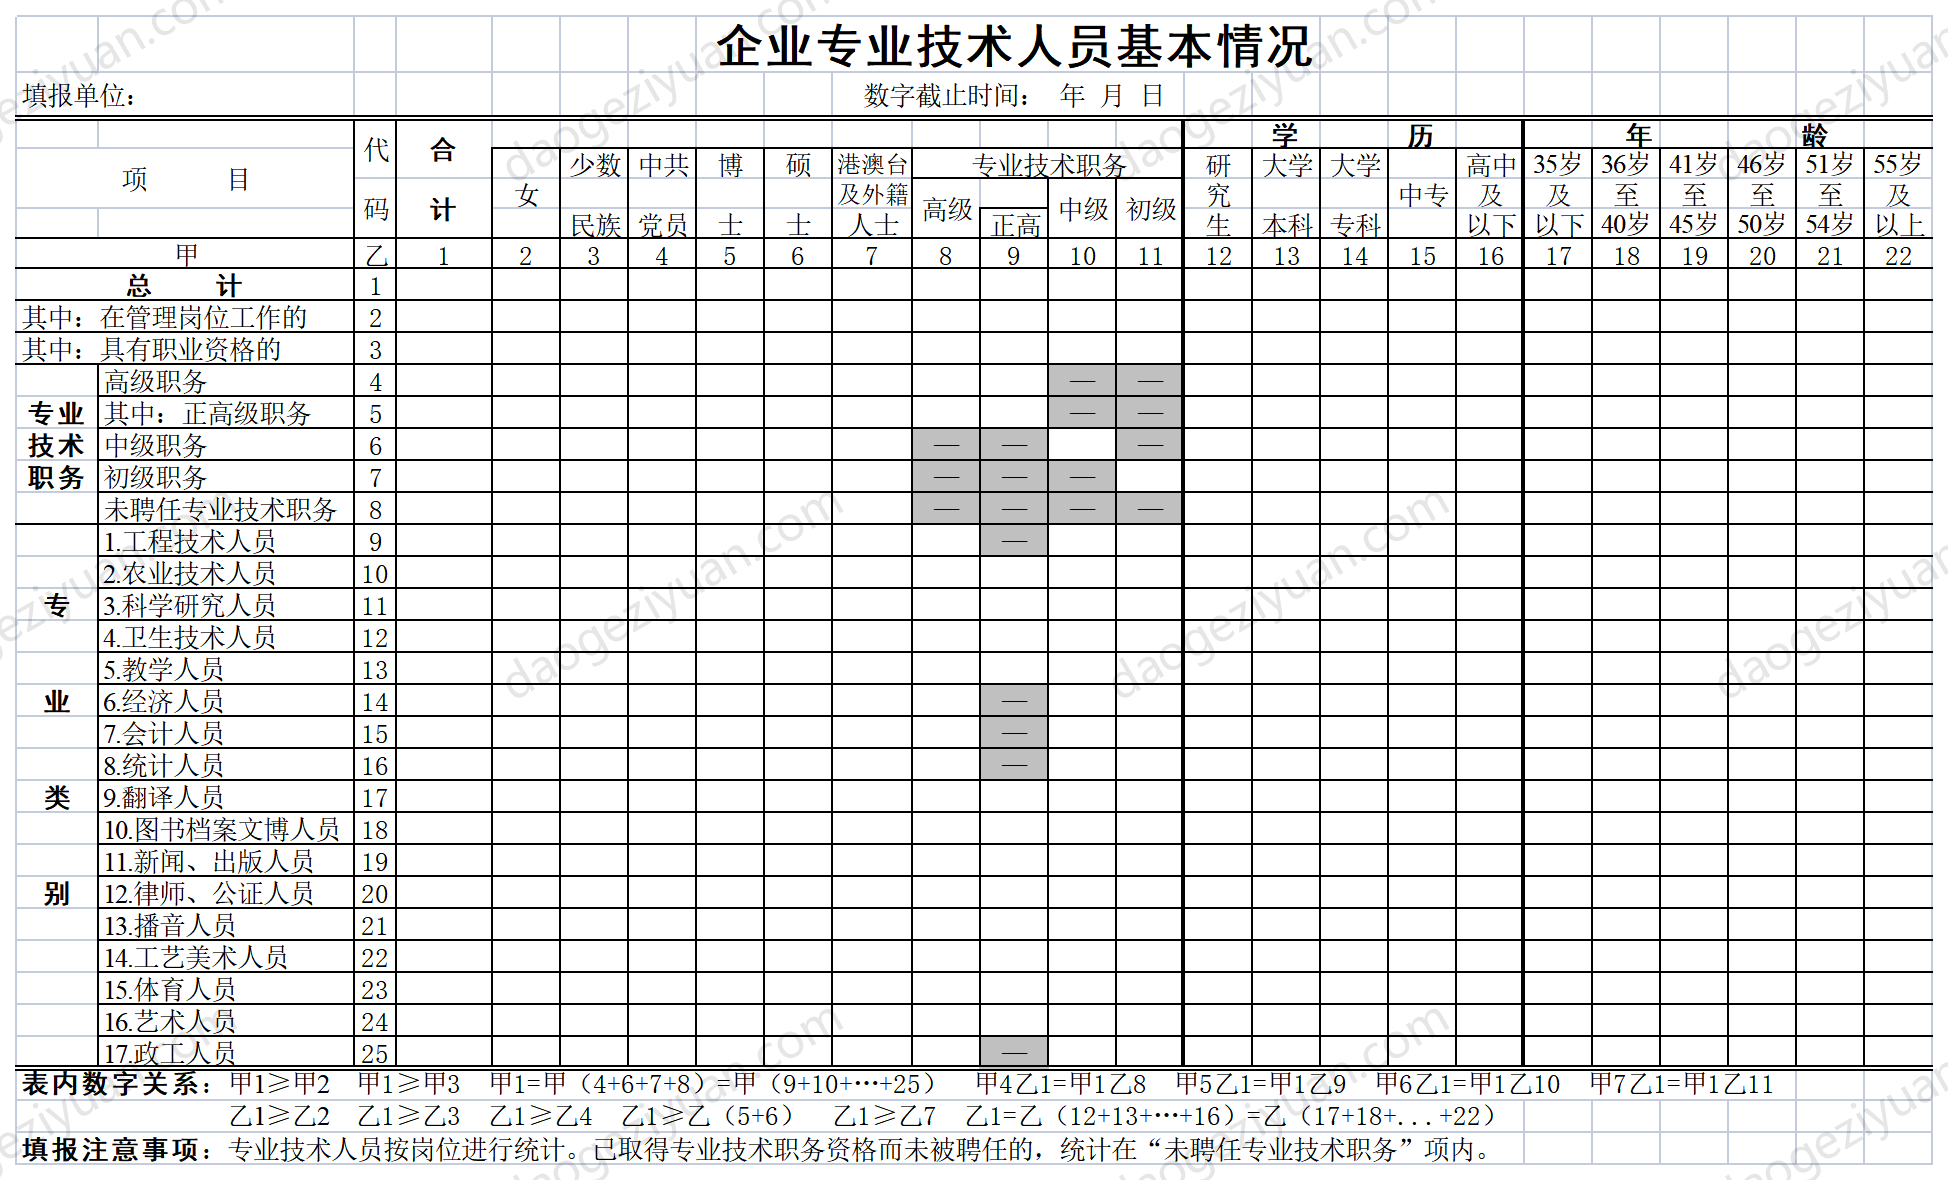 Basic information table of professional and technical personnel in enterprises.xls